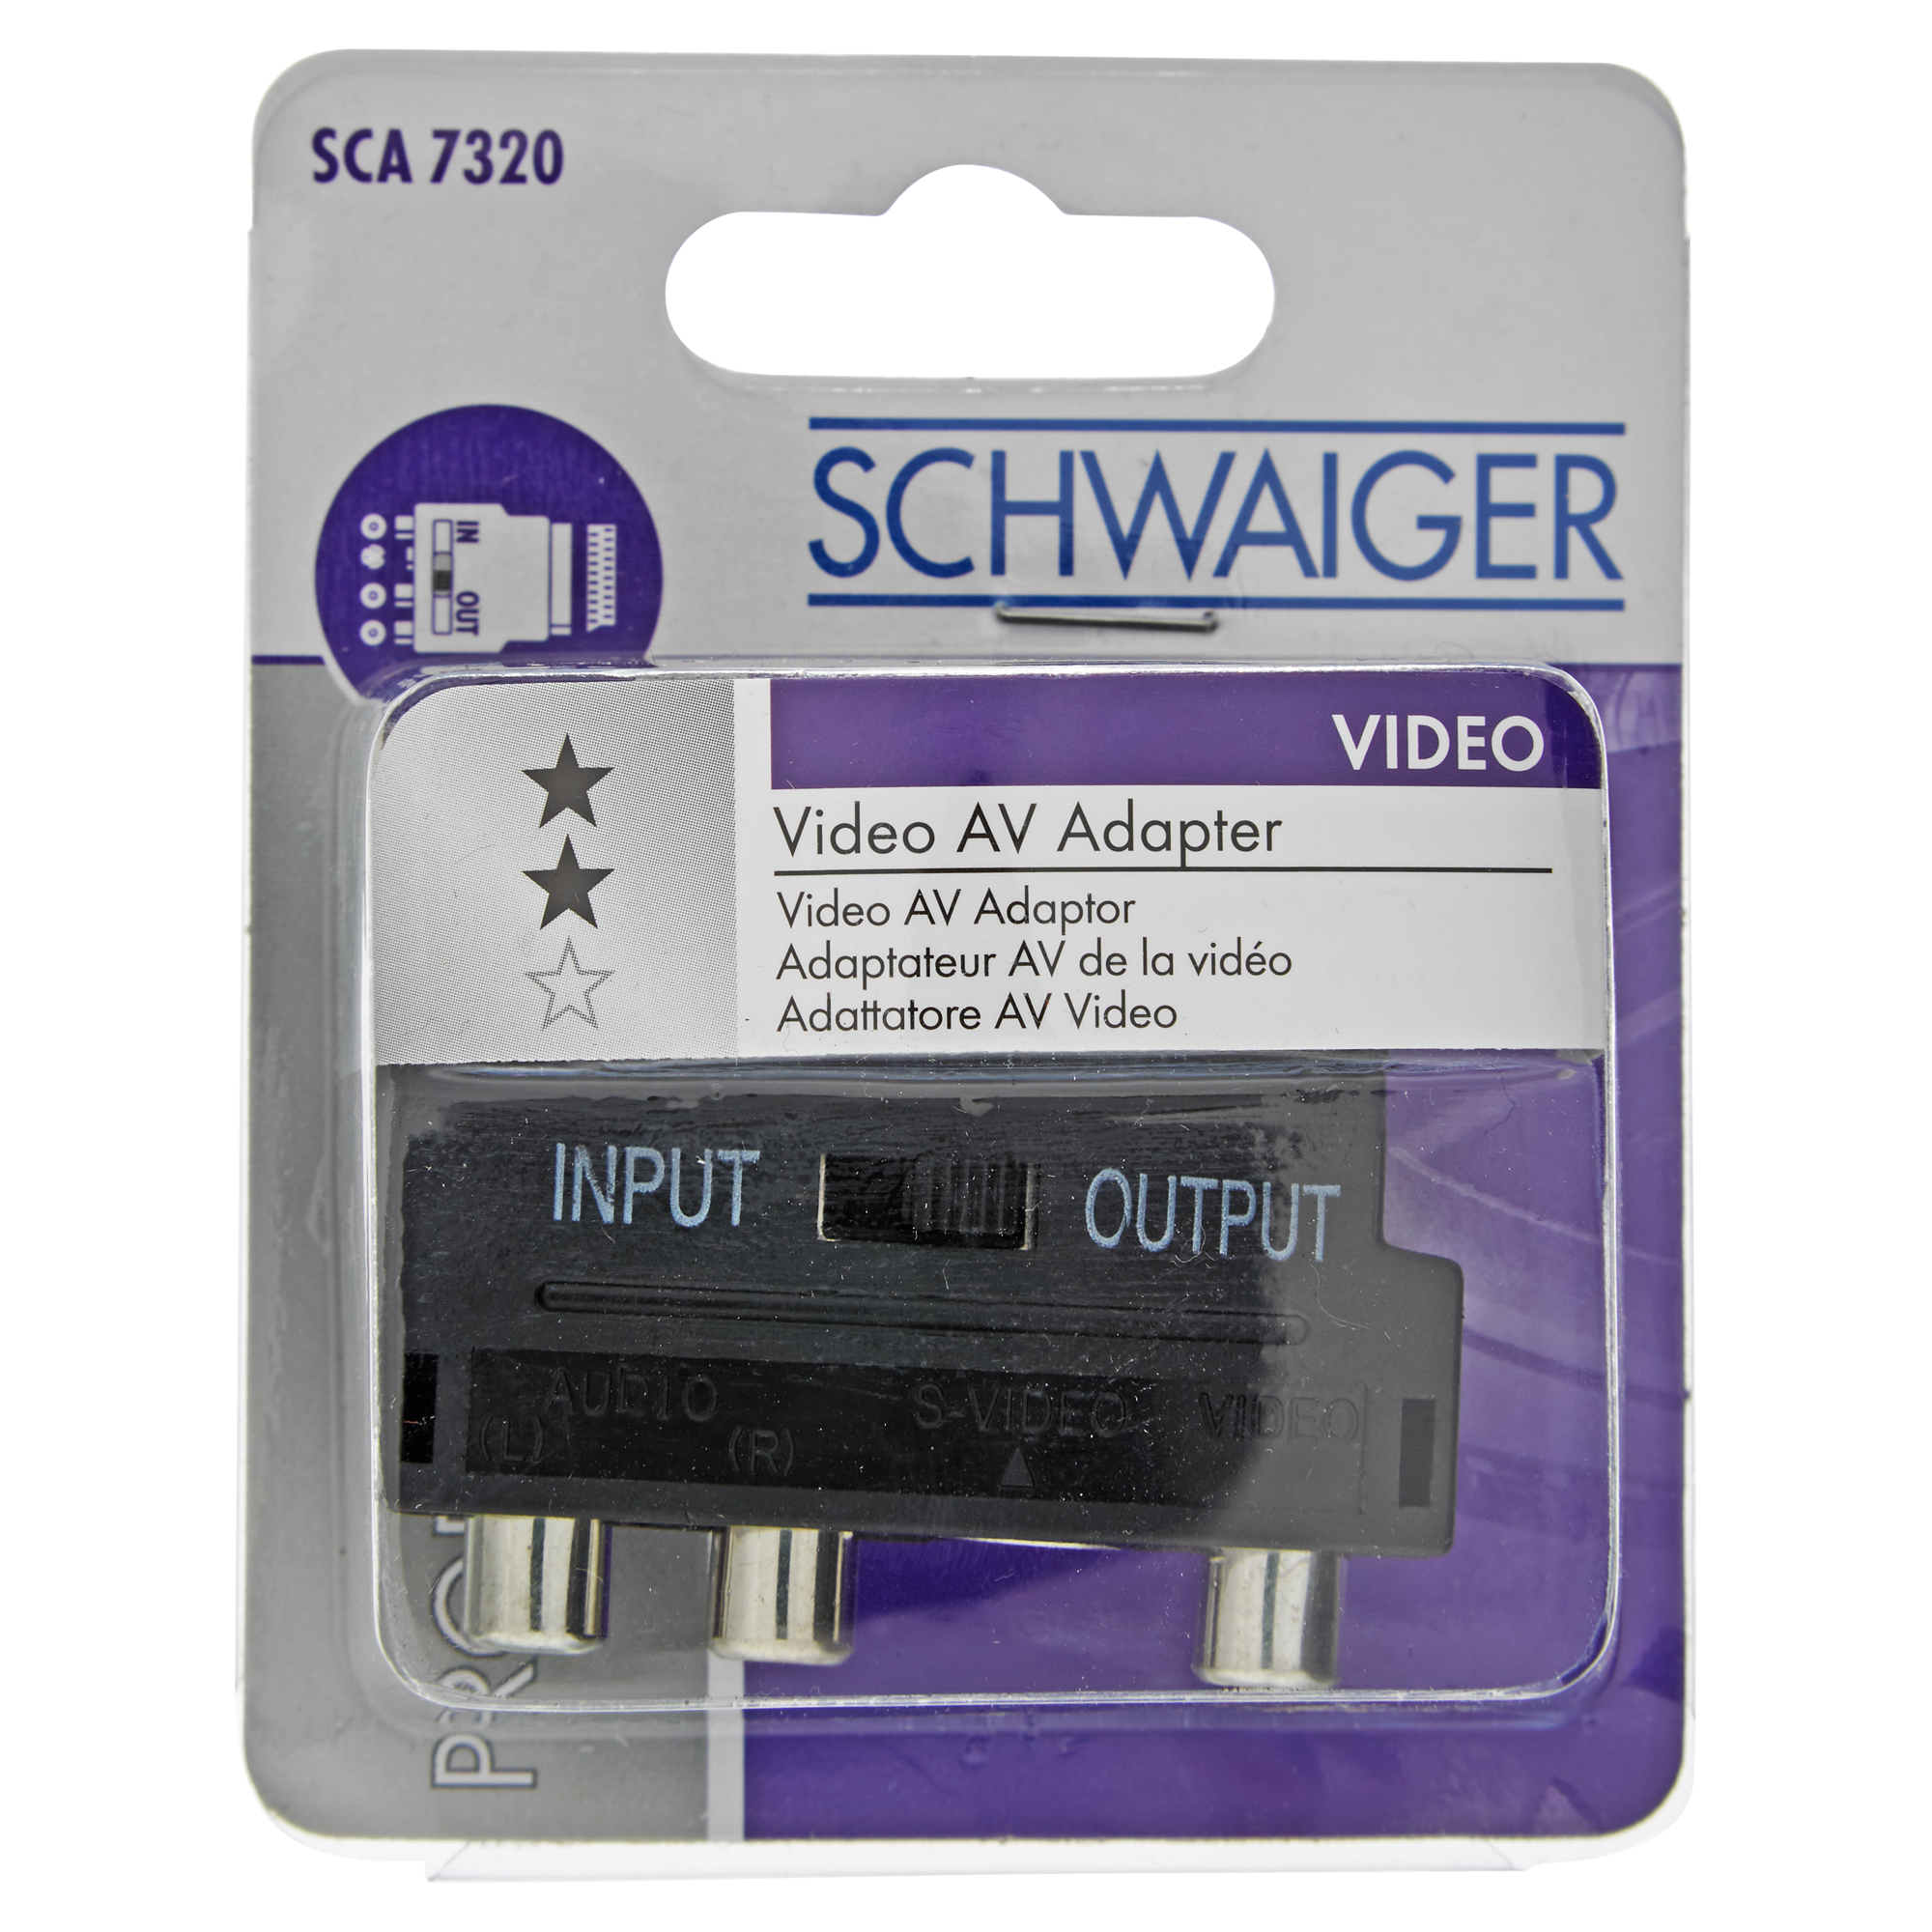 Video-AV-Adapter 3x Cinch/S-VHS/Scart + product picture